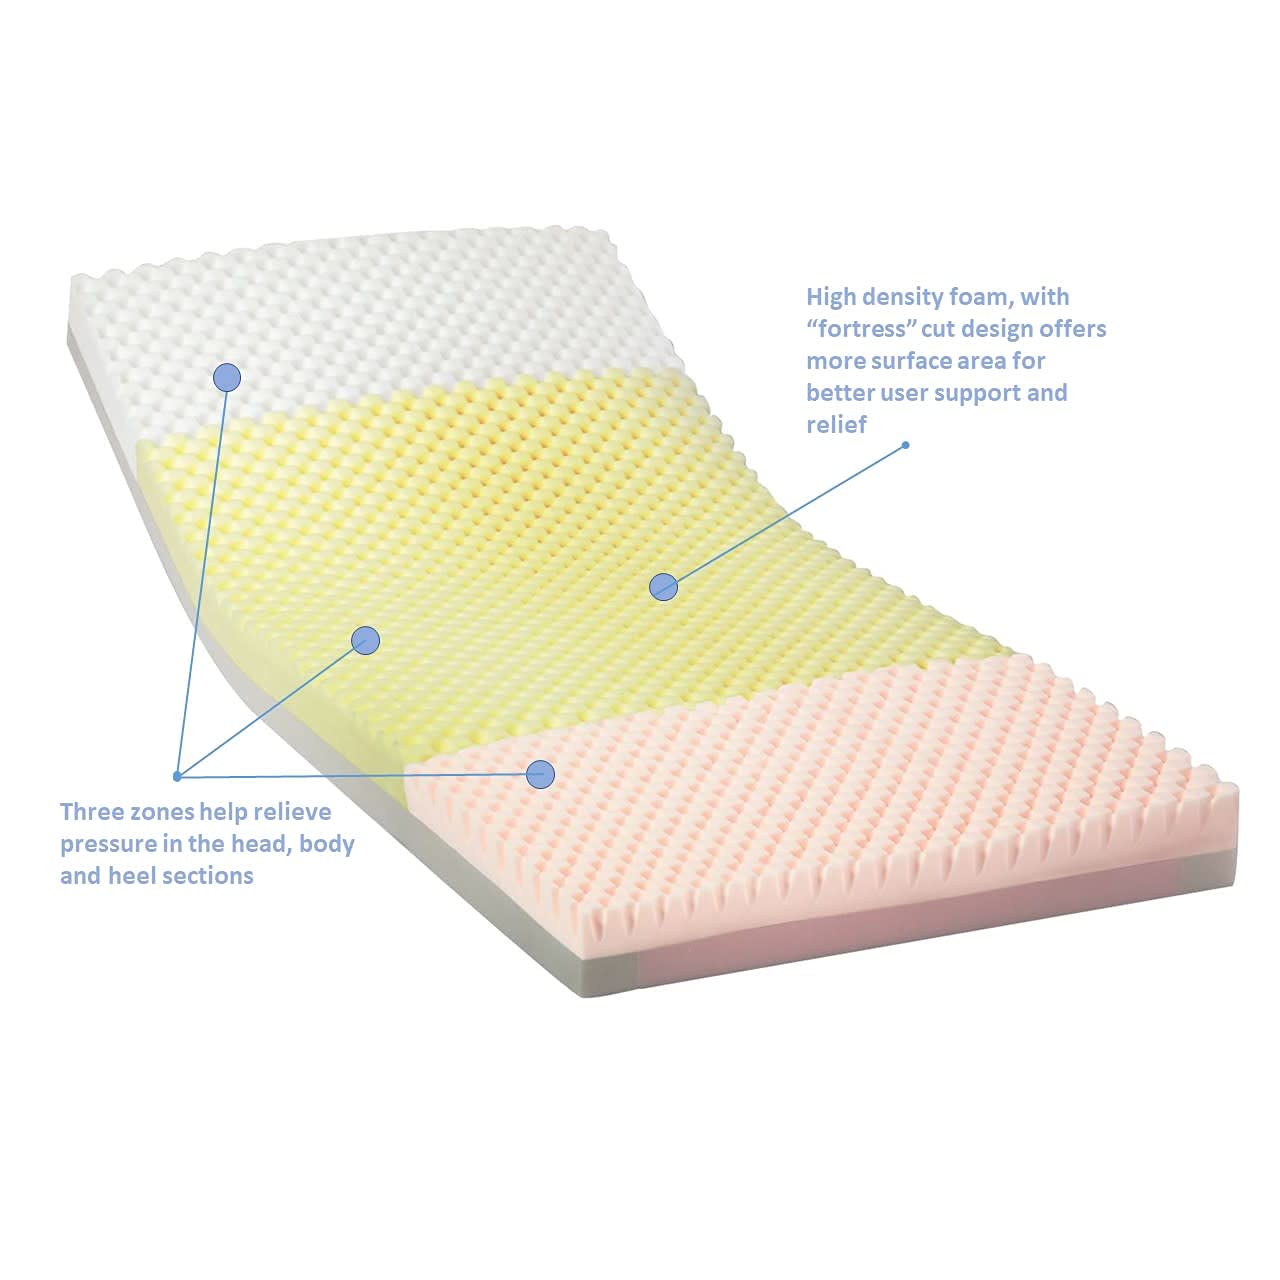 Invacare's Solace Prevention Hospital Bed Mattress, item number SPS1080 features the three zones to help relieve pressure in the head, body, and heel sections.  The image shows the design of the high-density foam used. The image is against a white background.